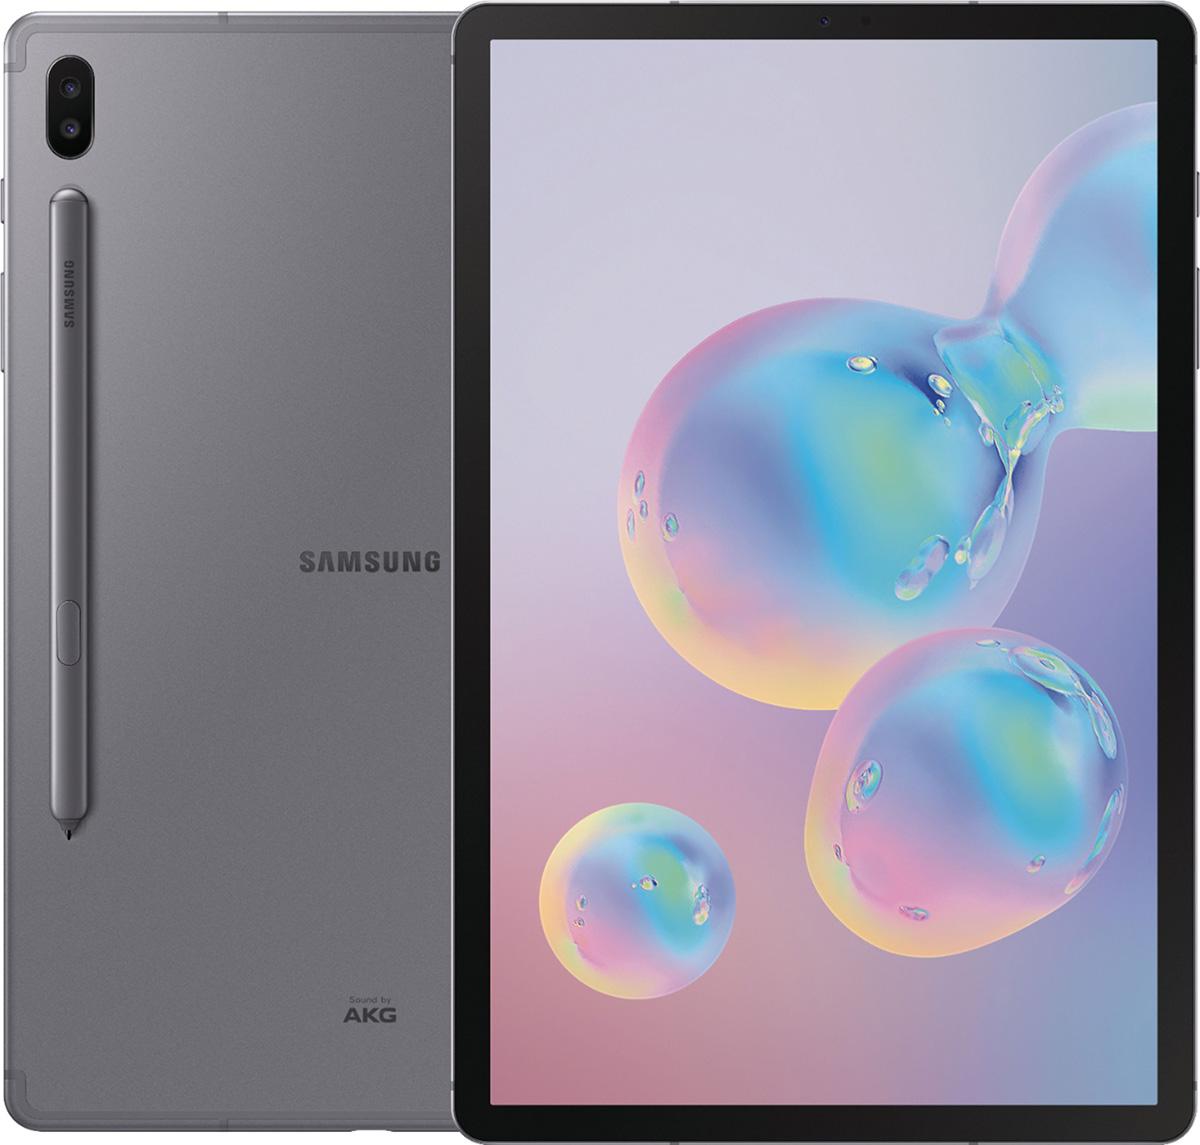 Samsung Galaxy Tab S6 10.5in 128GB Tablet for $352.92 Shipped